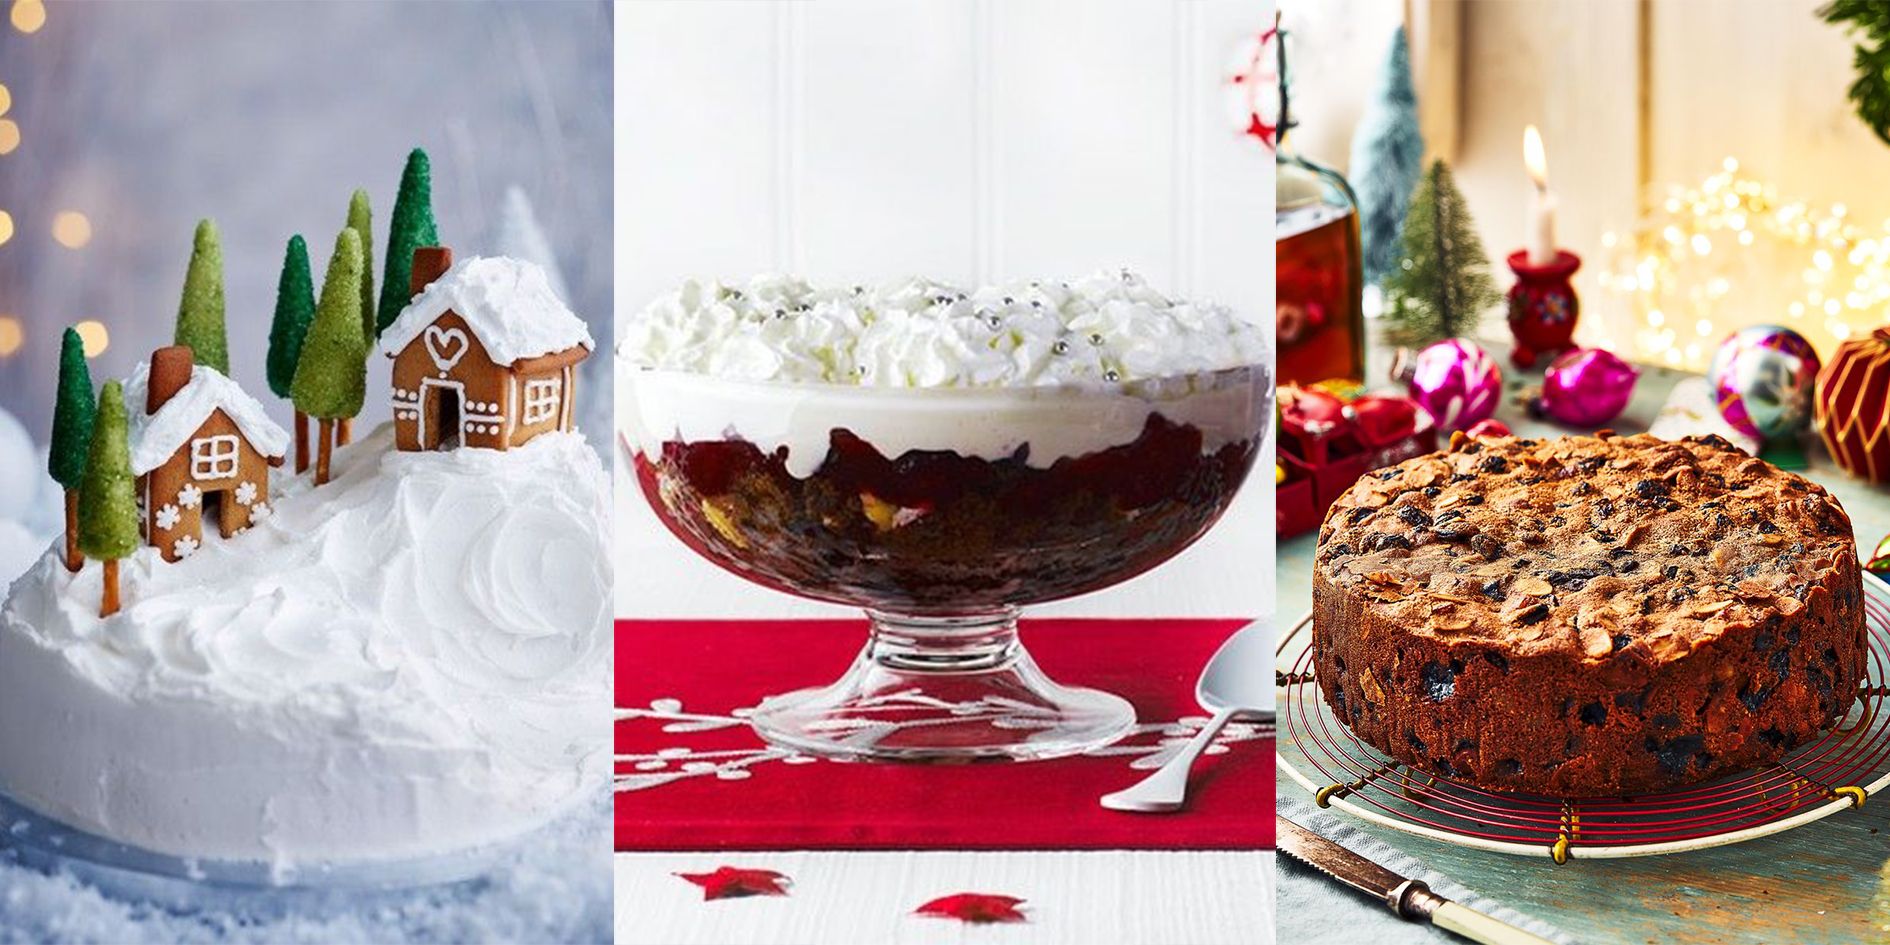 Why Soak Your Fruit For Weeks For a Christmas Cake - FoodCrumbles